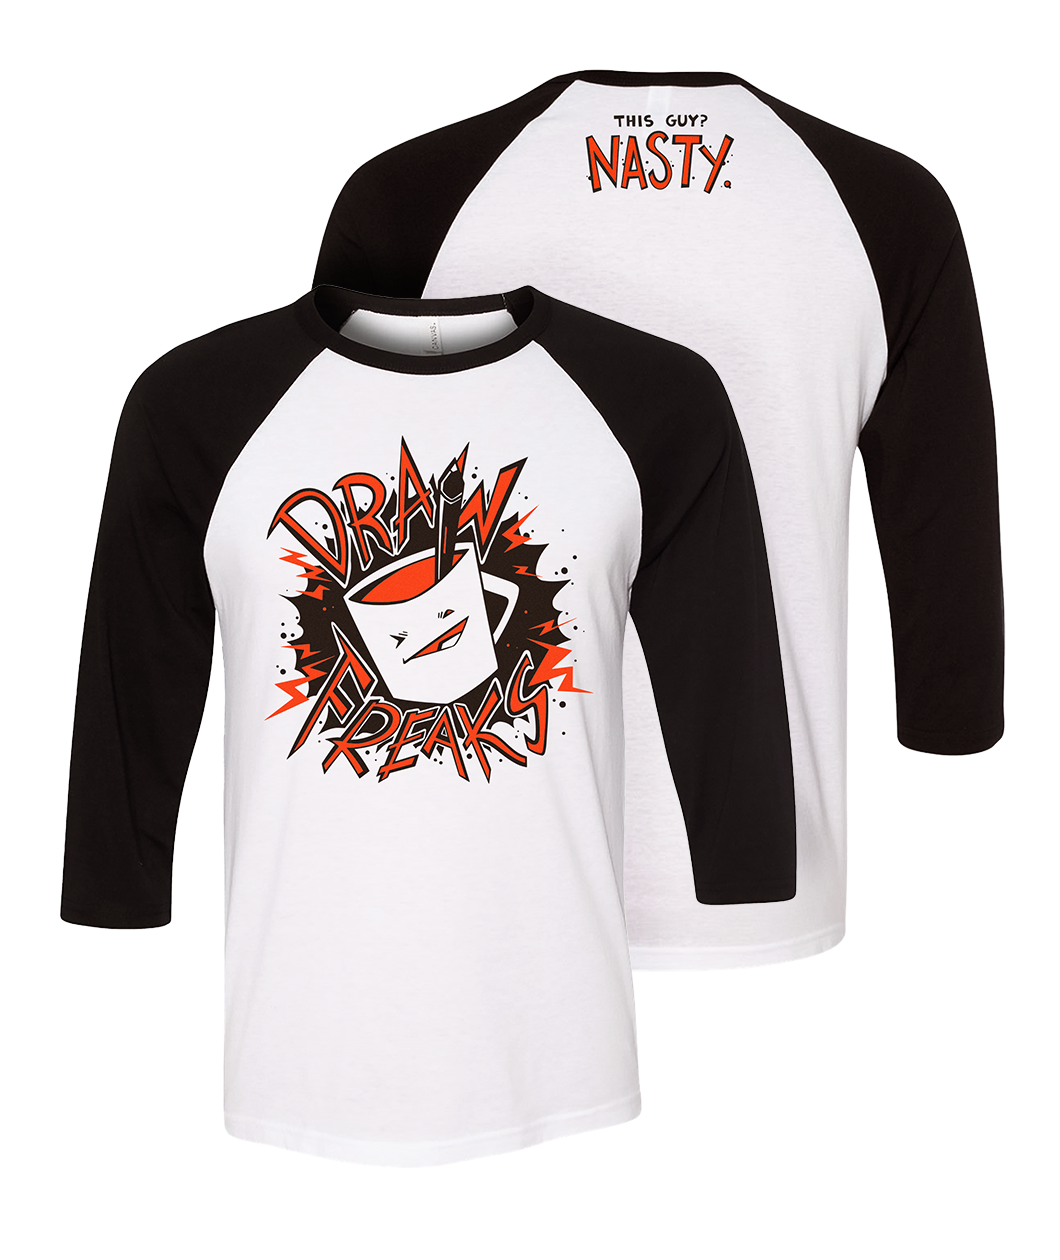 A black and white baseball tee that has the Drawfee logo on the front and the words 